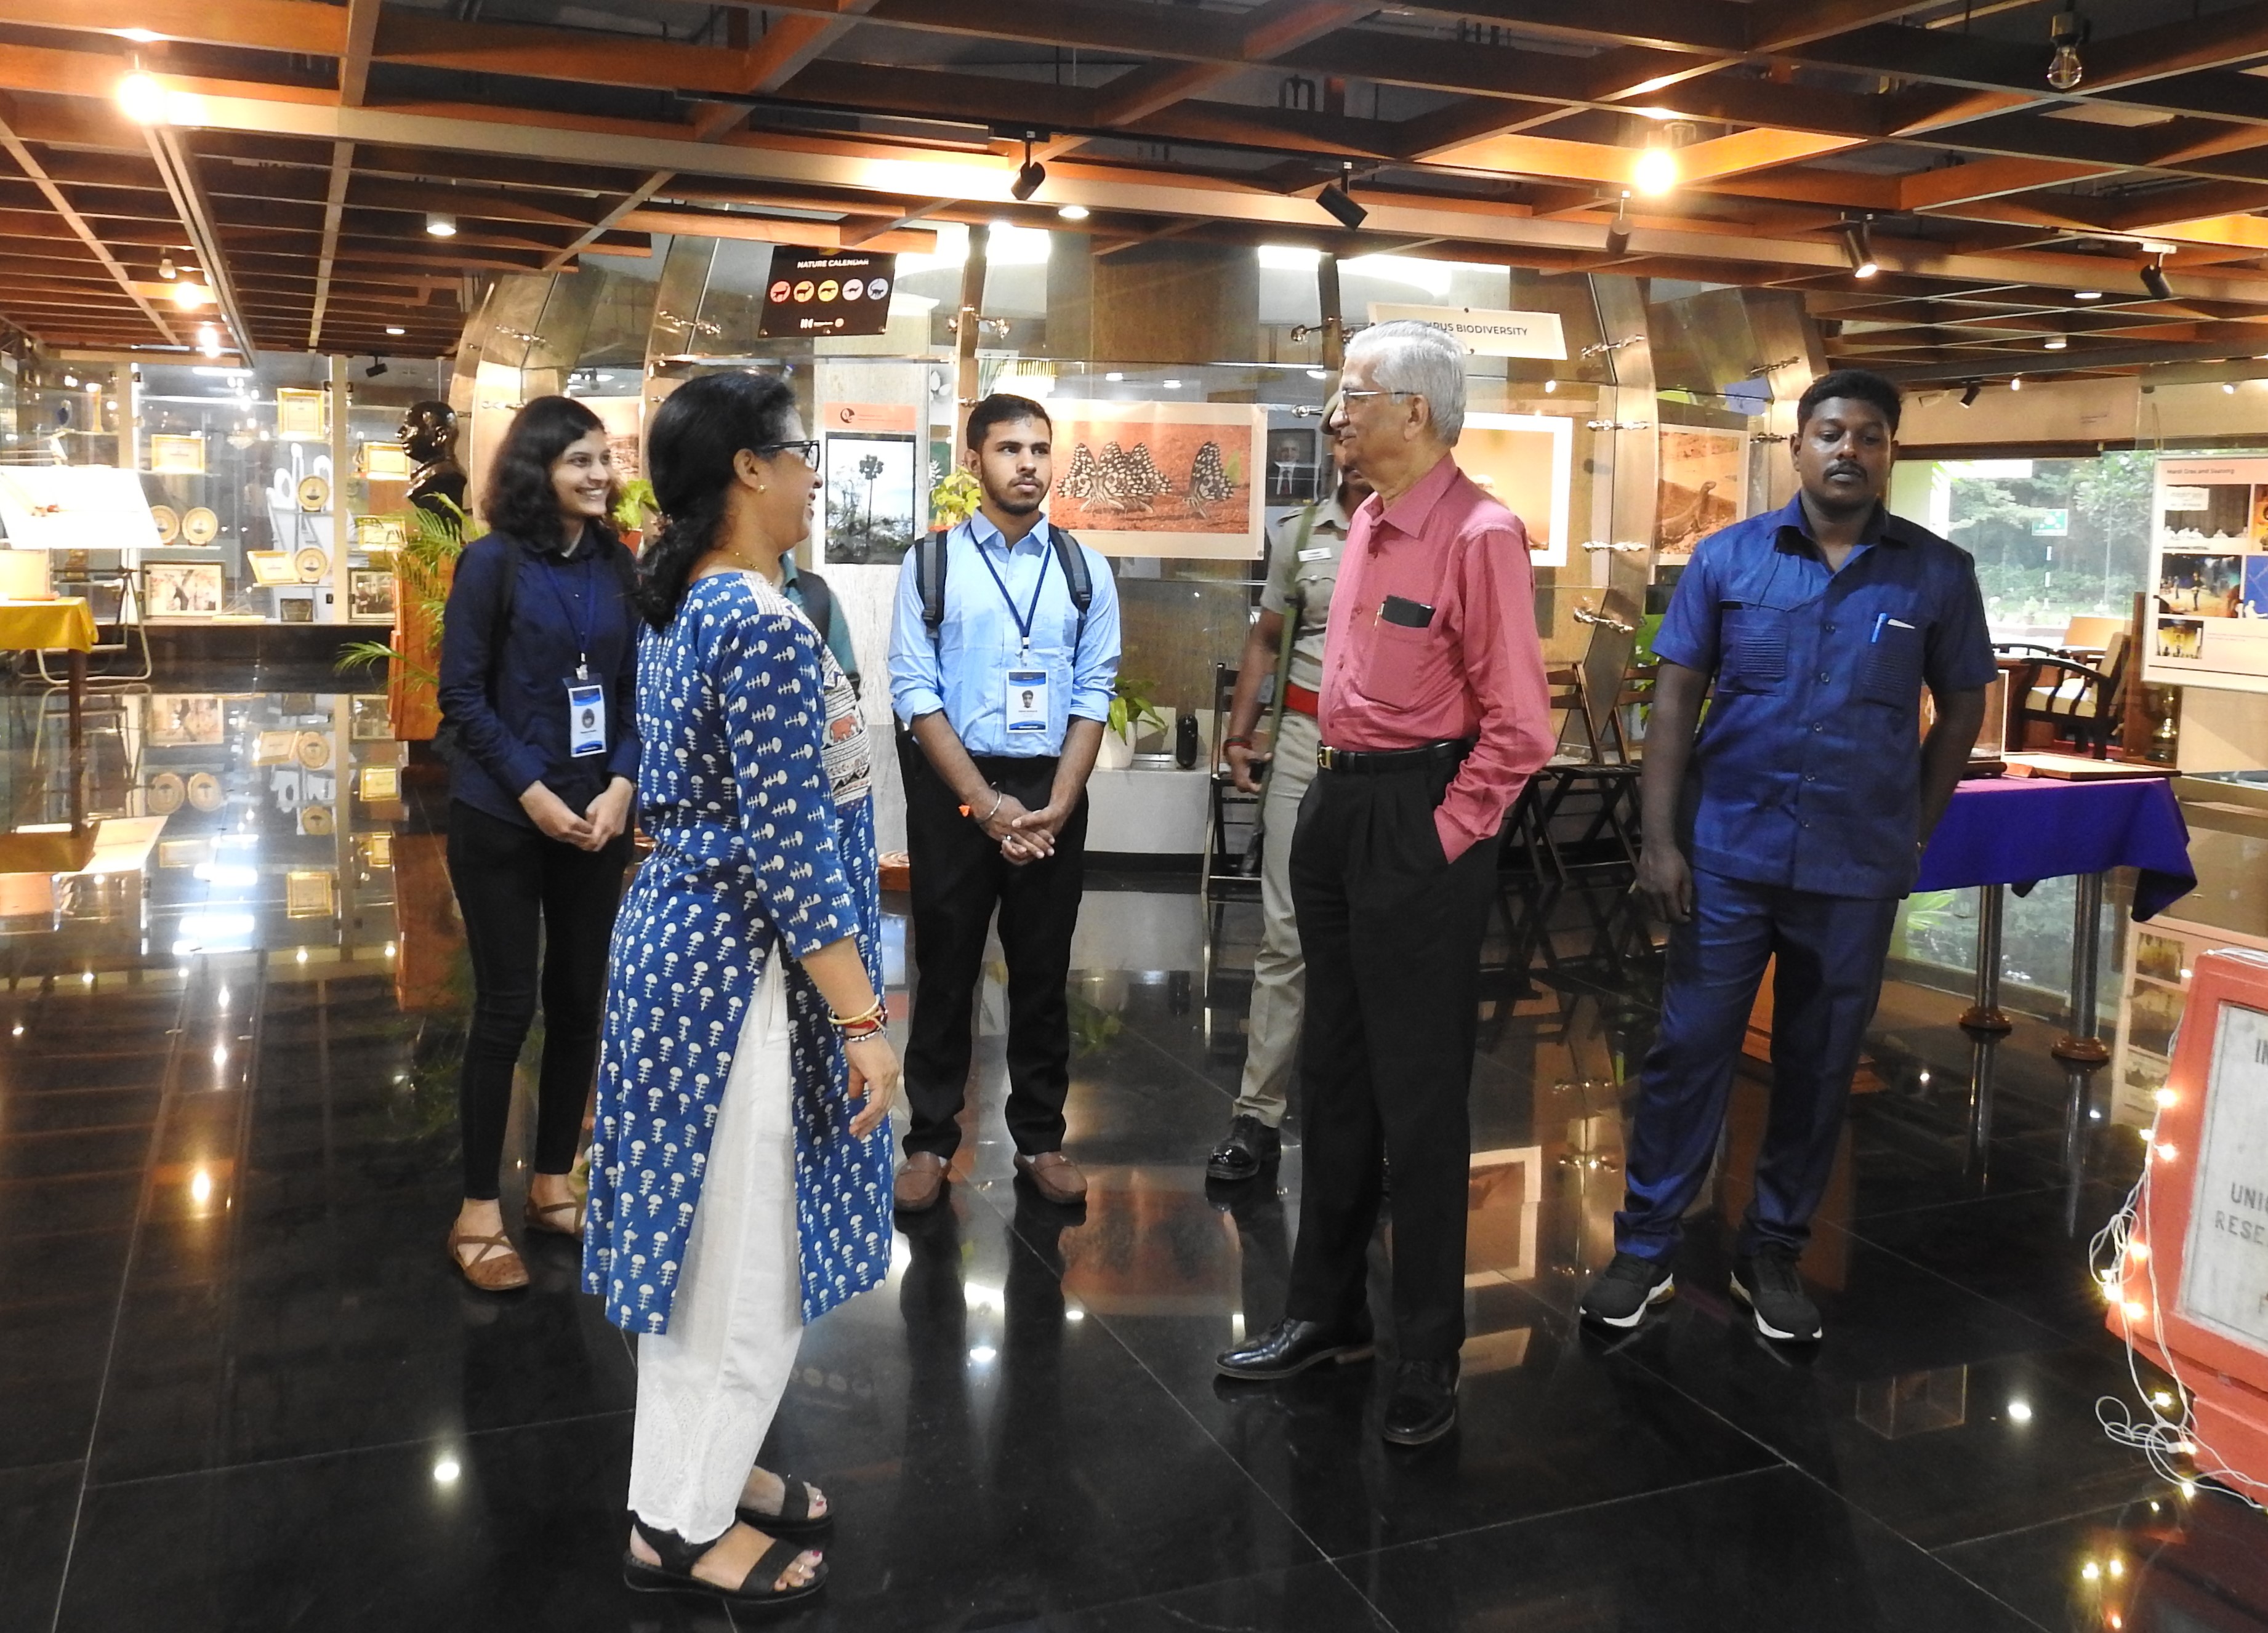 Dr. Anil Kakodkar engages in conversation at the Heritage Centre